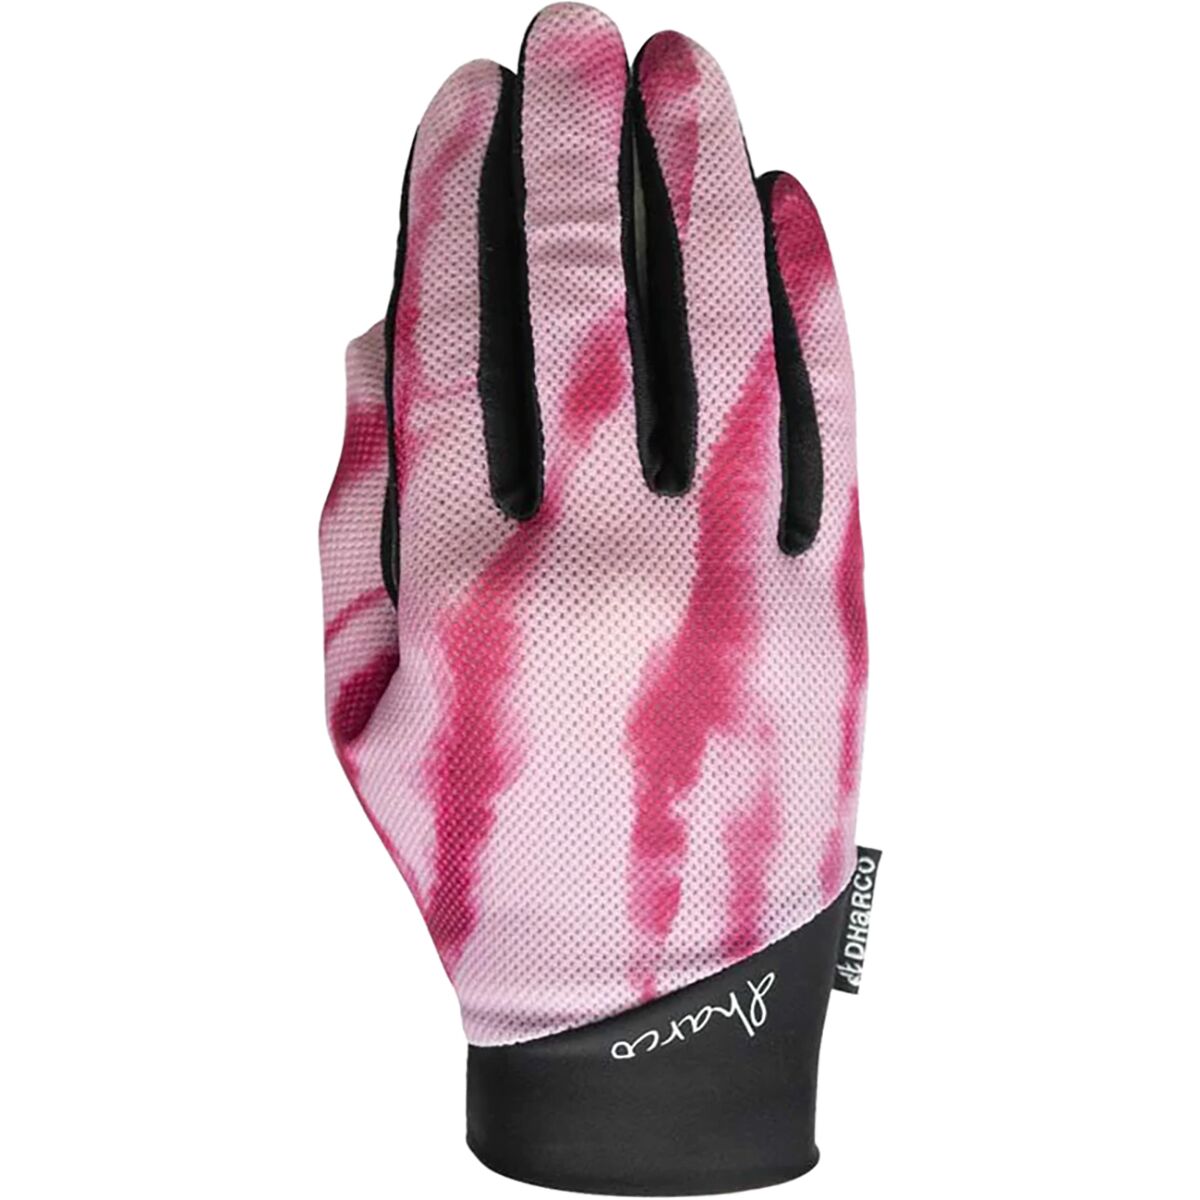 DHaRCO Gloves - Women's